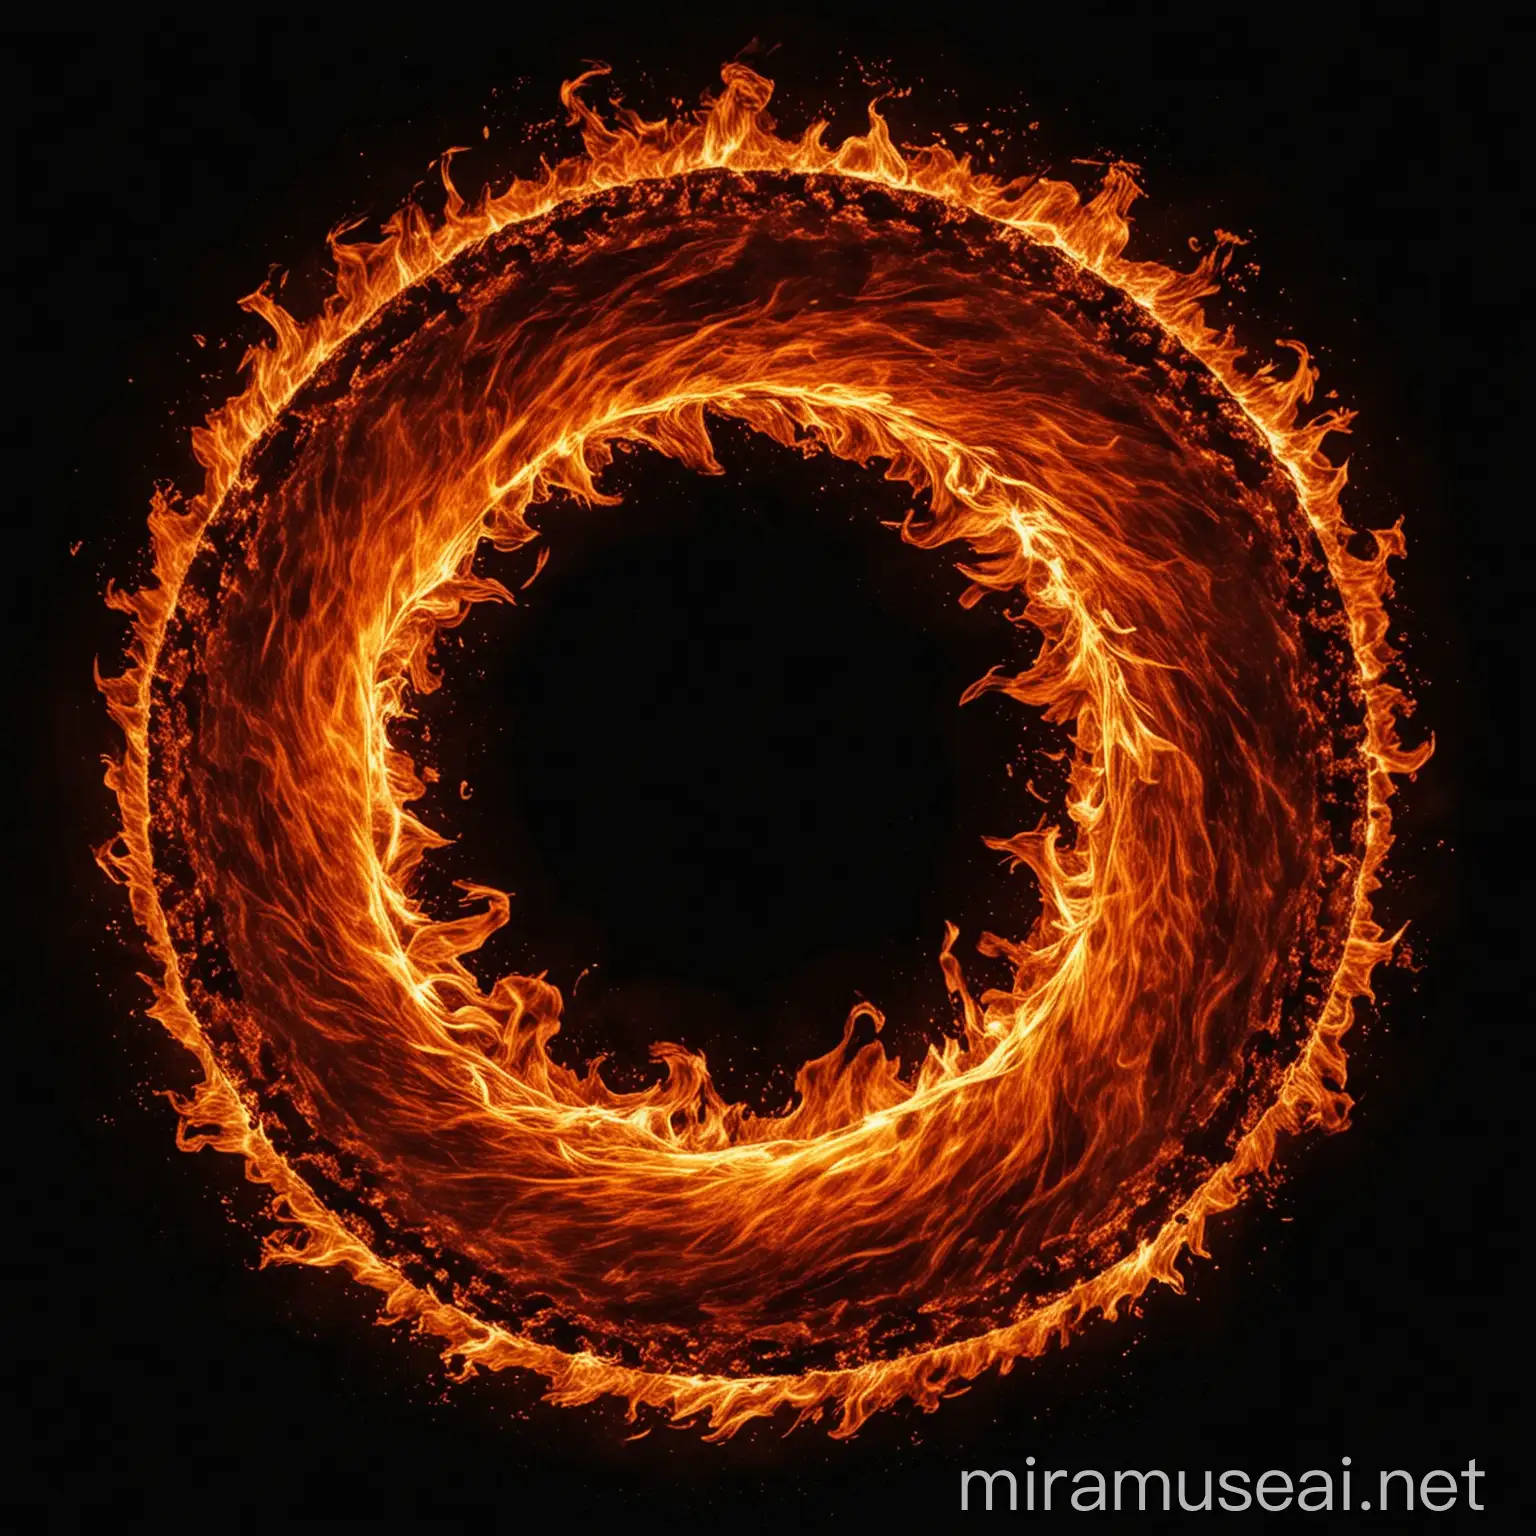 A circle of fire with a black background behind it 